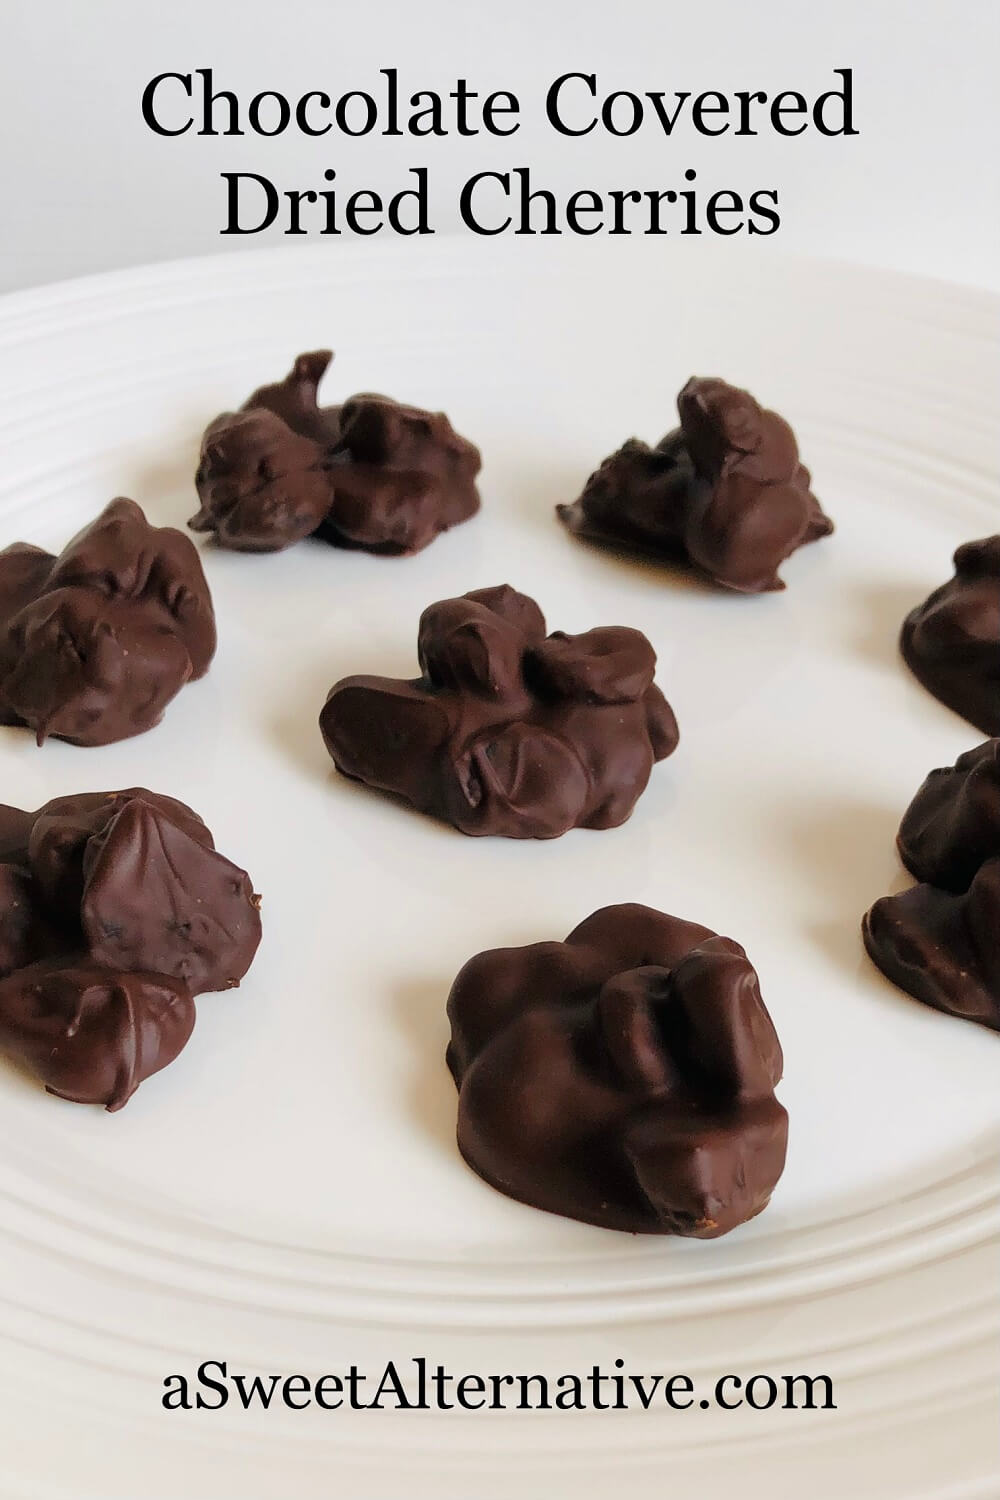 Chocolate Covered Dried Cherries - A Sweet Alternative